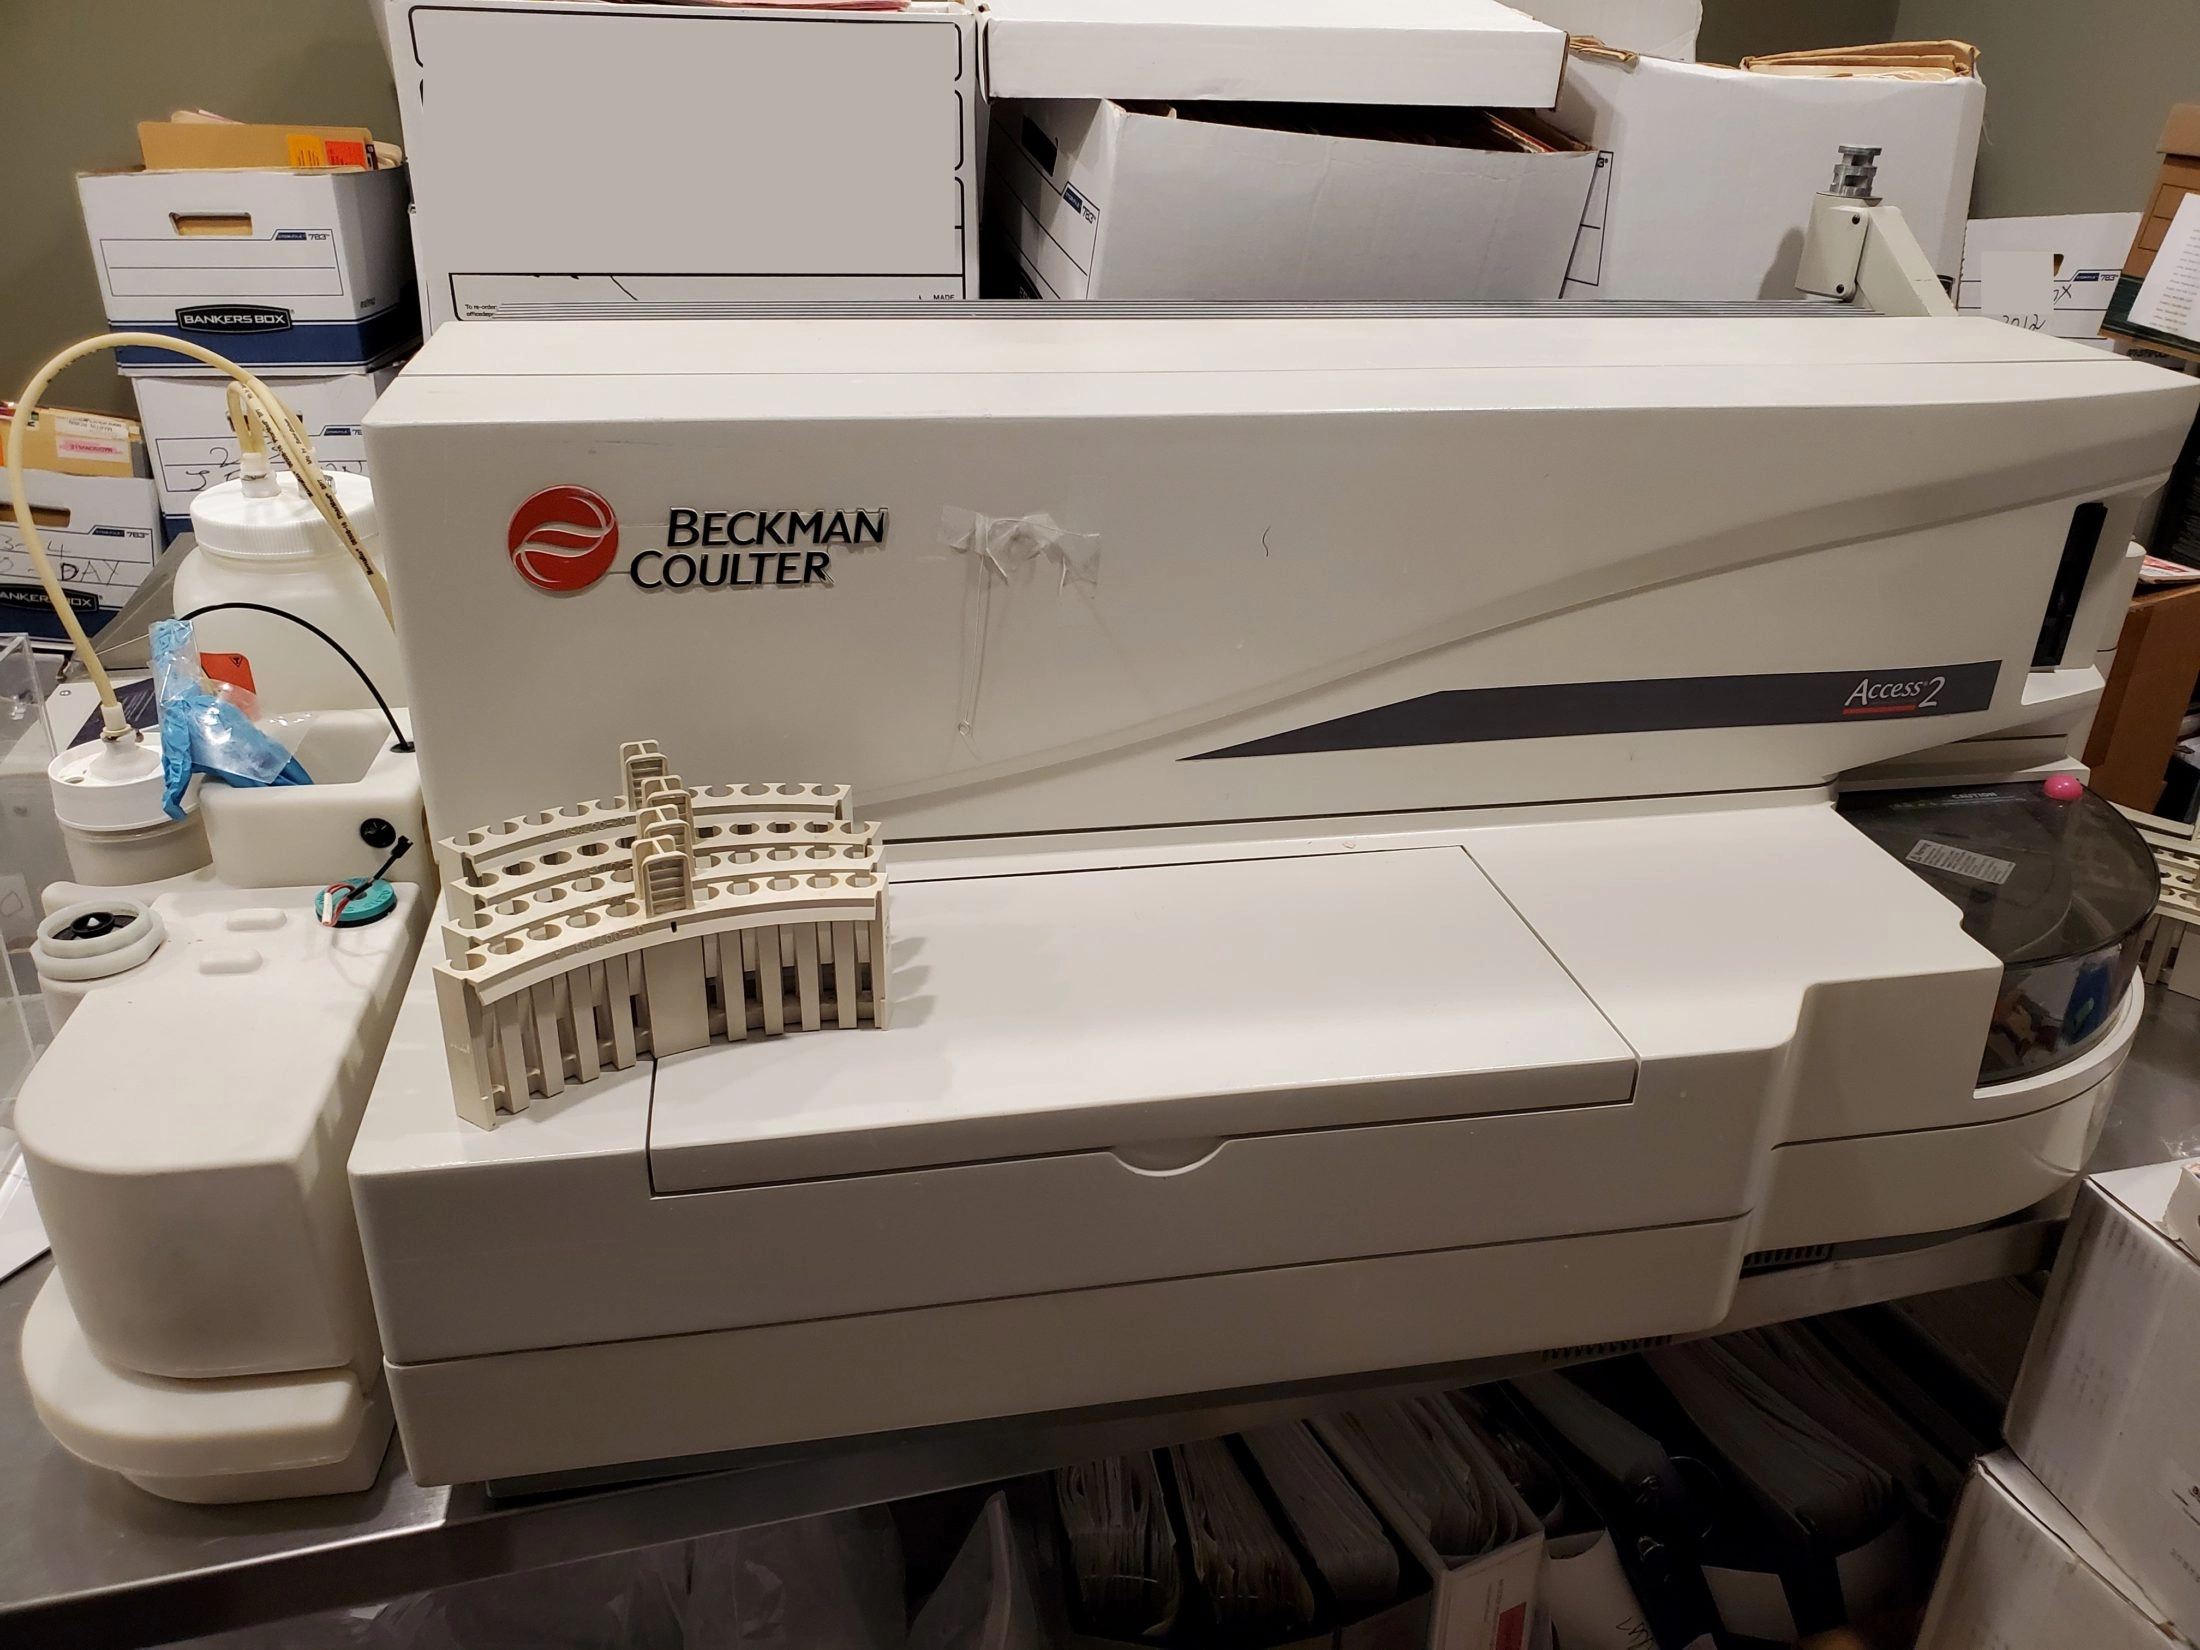 Beckman Coulter Access 2